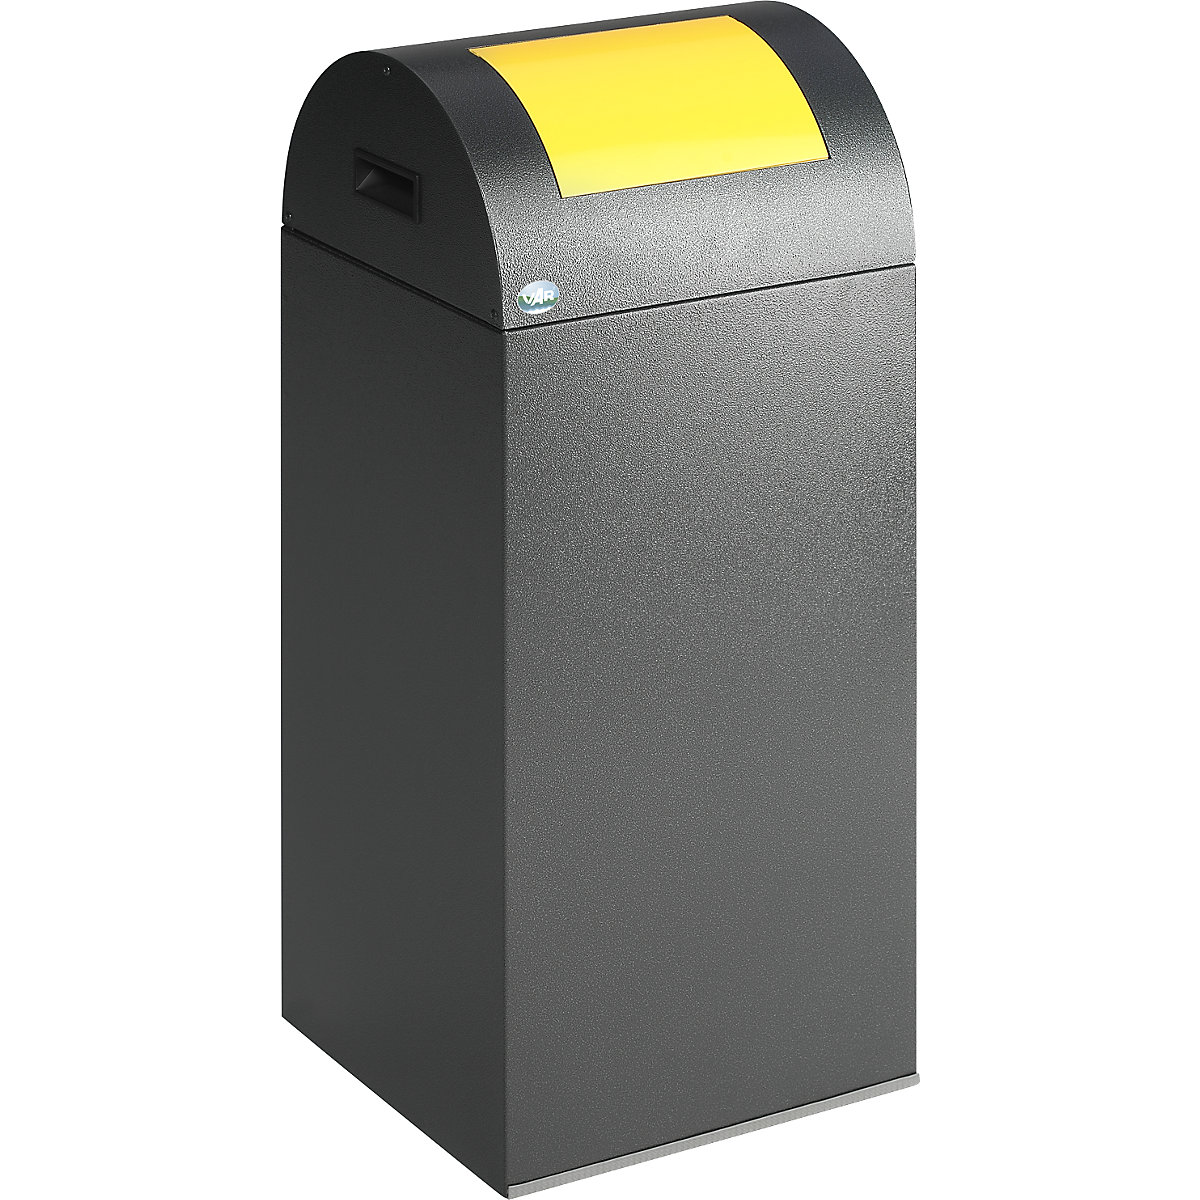 Self extinguishing recyclable waste collector – VAR, capacity 60 l, WxHxD 320 x 800 x 320 mm, antique silver, yellow flap-6